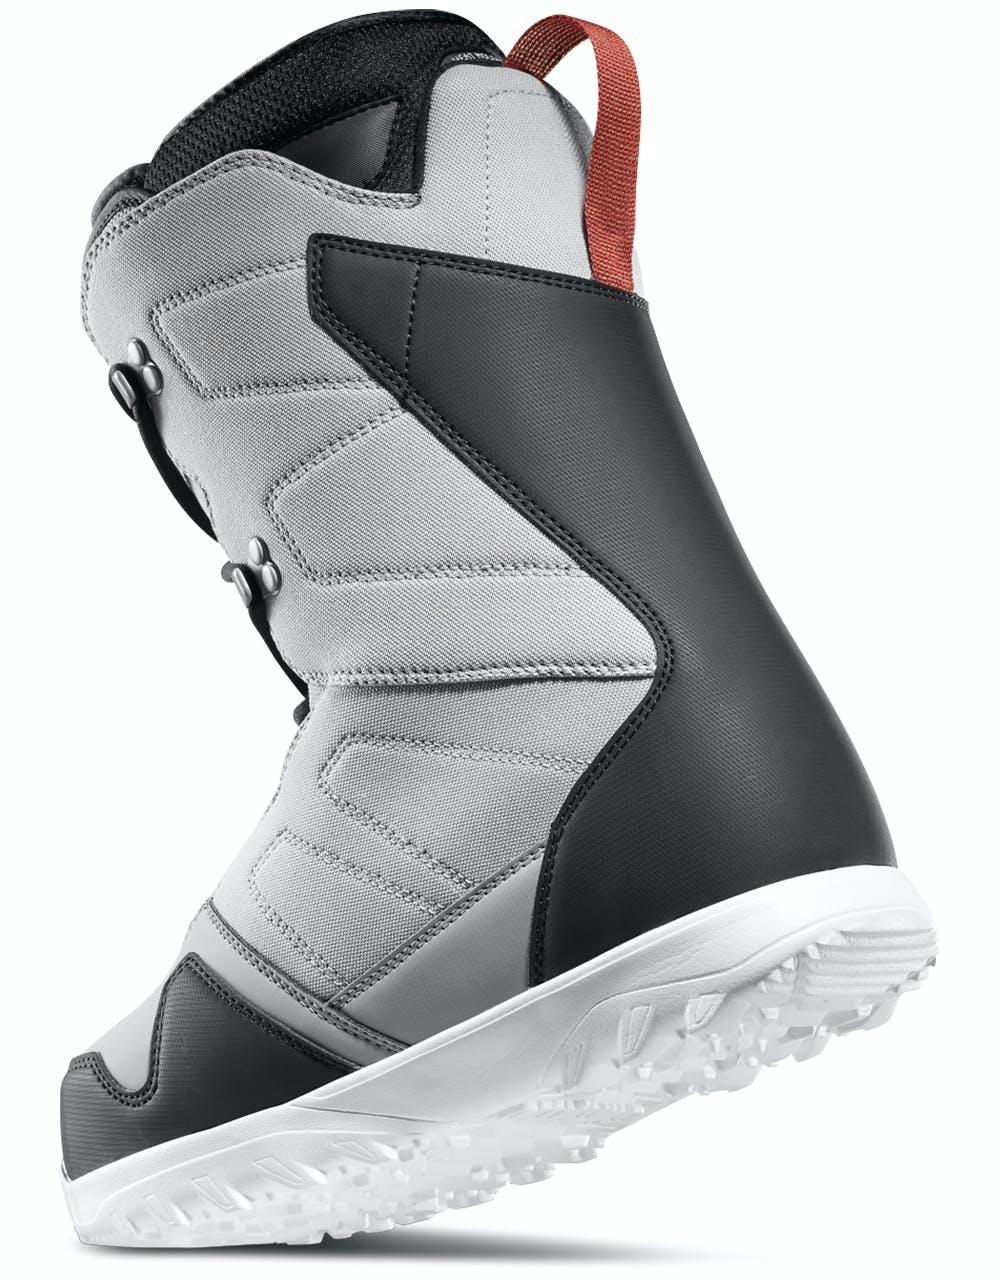 ThirtyTwo Exit 2020 Snowboard Boots - Grey/Black/Red